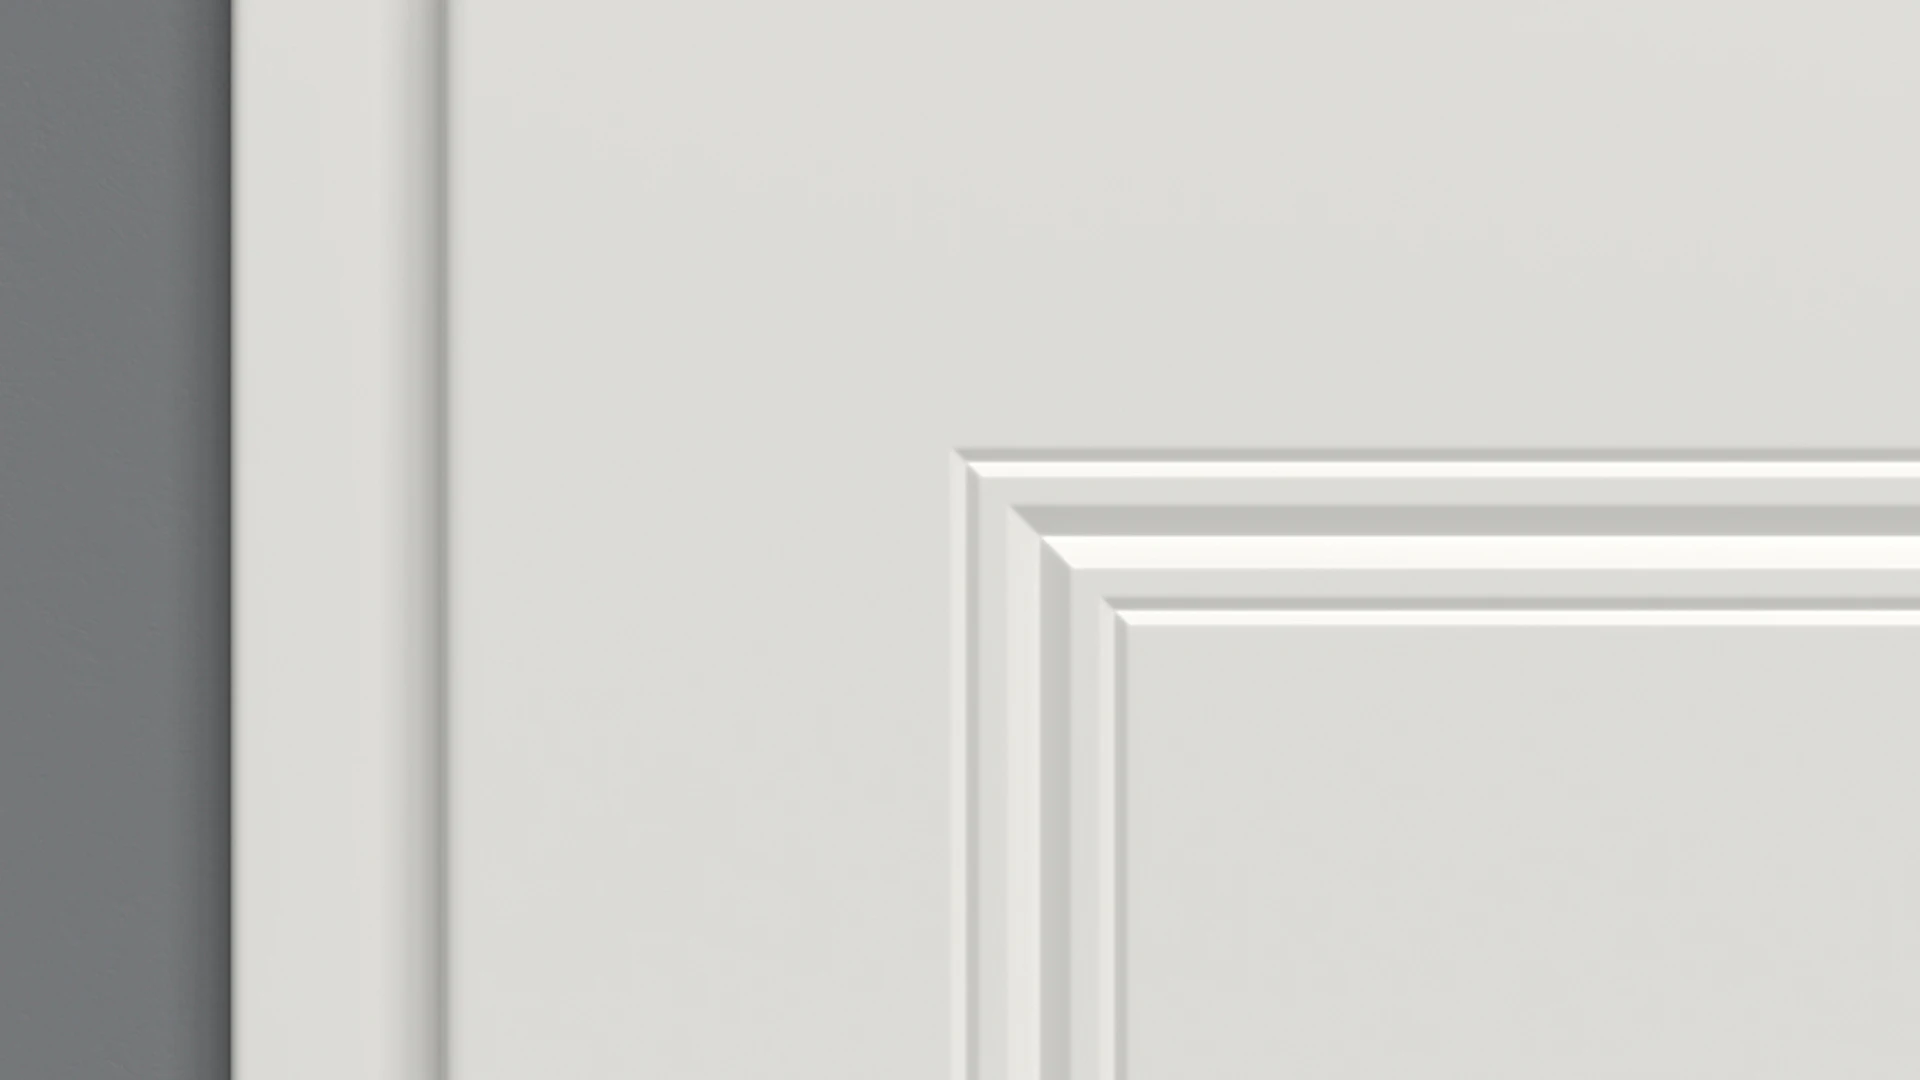 planeo interior door lacquer 2.0 - Arno 9010 white lacquer 2110 x 860 mm DIN R - round RSP hinge 3-t